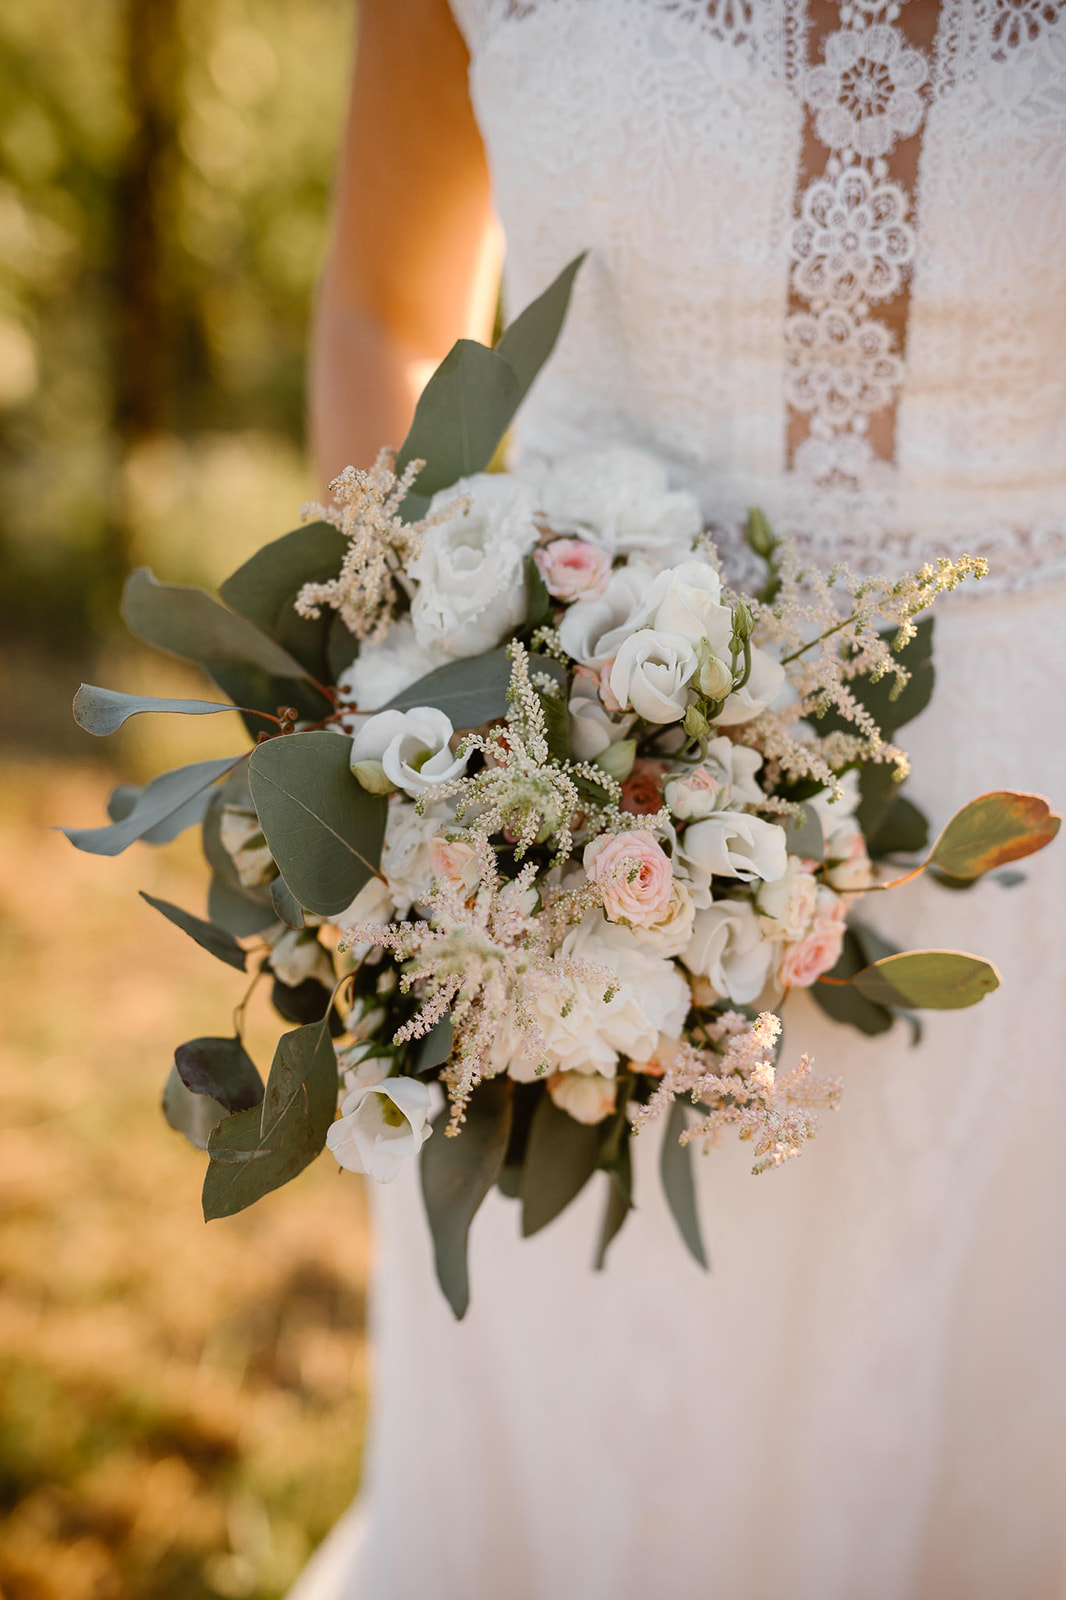 bridal bouquet for a wedding in Italy, with roses and eucalyptus